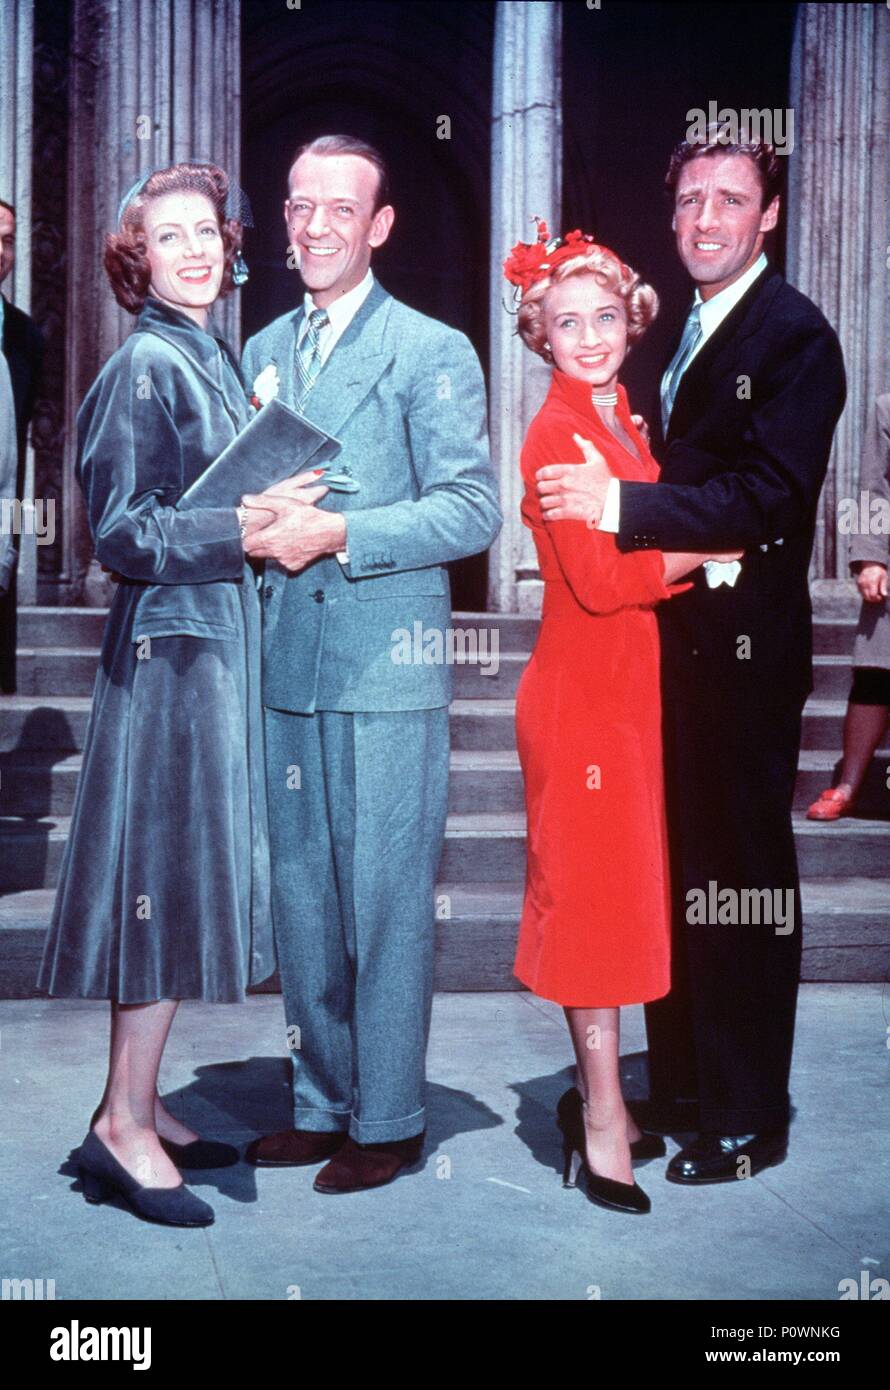 Original Film Title: ROYAL WEDDING. English Title: ROYAL WEDDING. Film  Director: STANLEY DONEN. Year: 1951. Stars: PETER LAWFORD; FRED ASTAIRE;  JANE POWELL. Credit: M.G.M / Album Stock Photo - Alamy